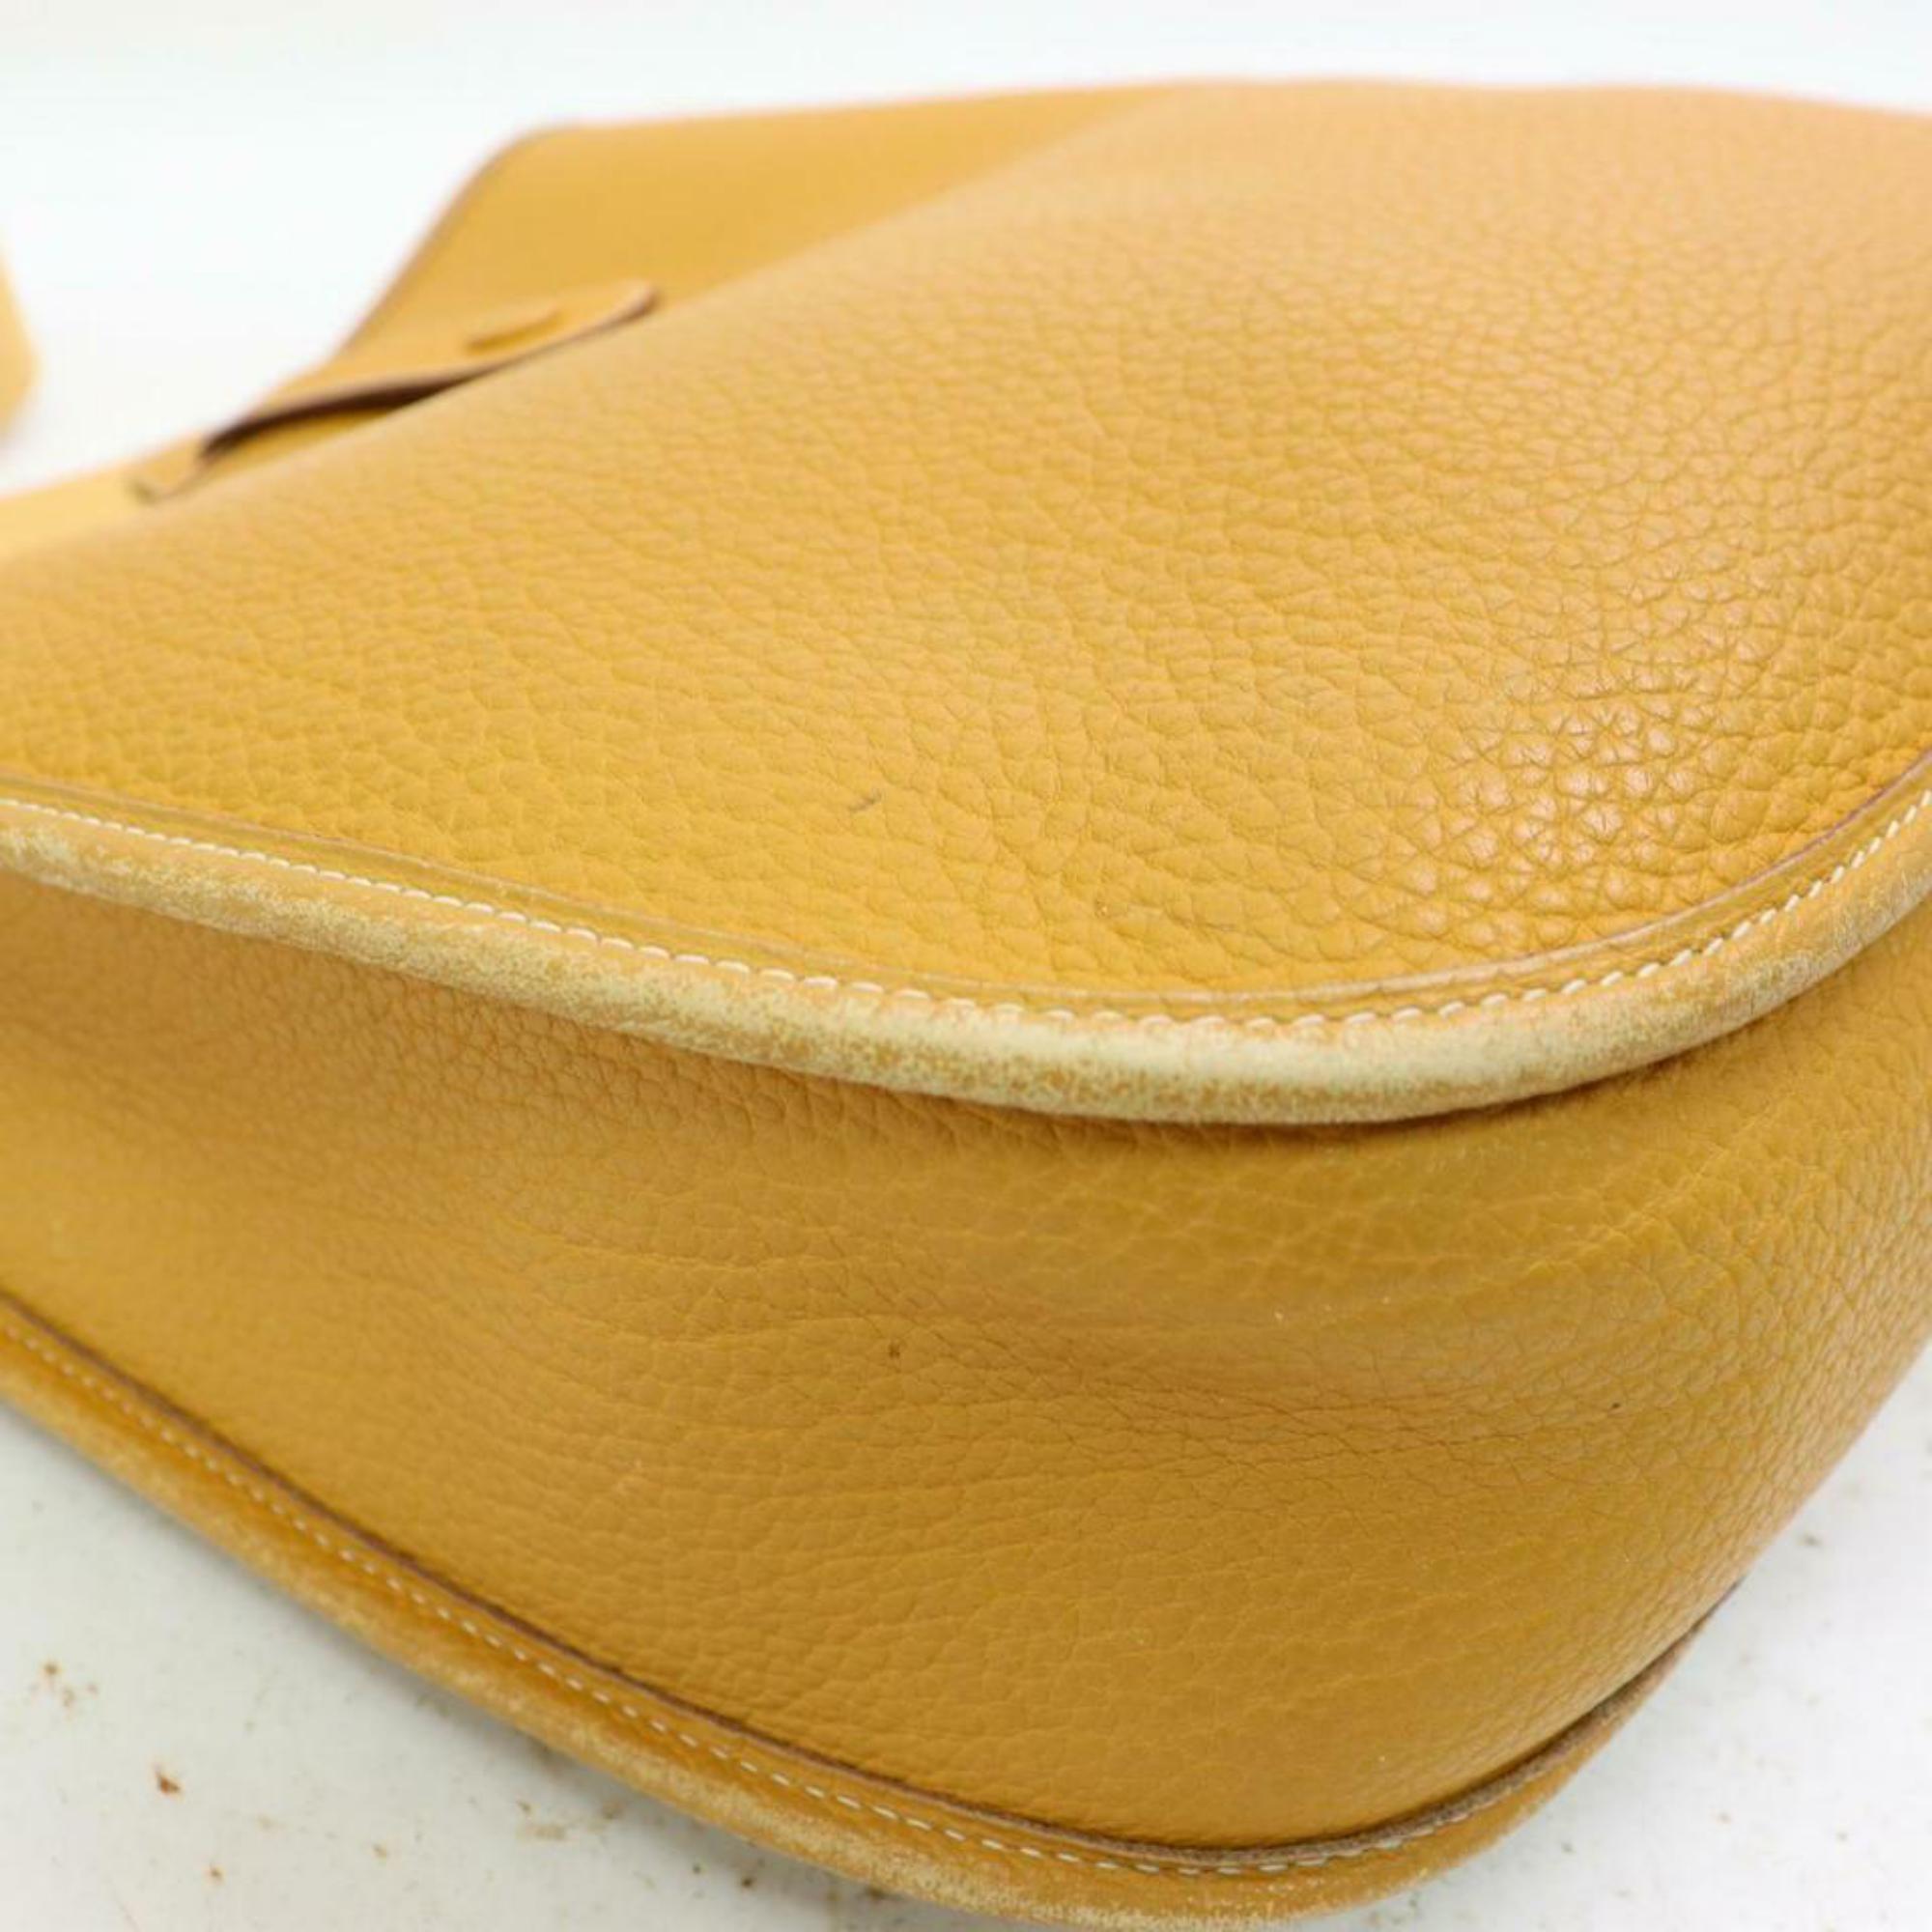 Hermès Evelyne Mustard Clemence 870631 Yellow Leather Messenger Bag For Sale 5